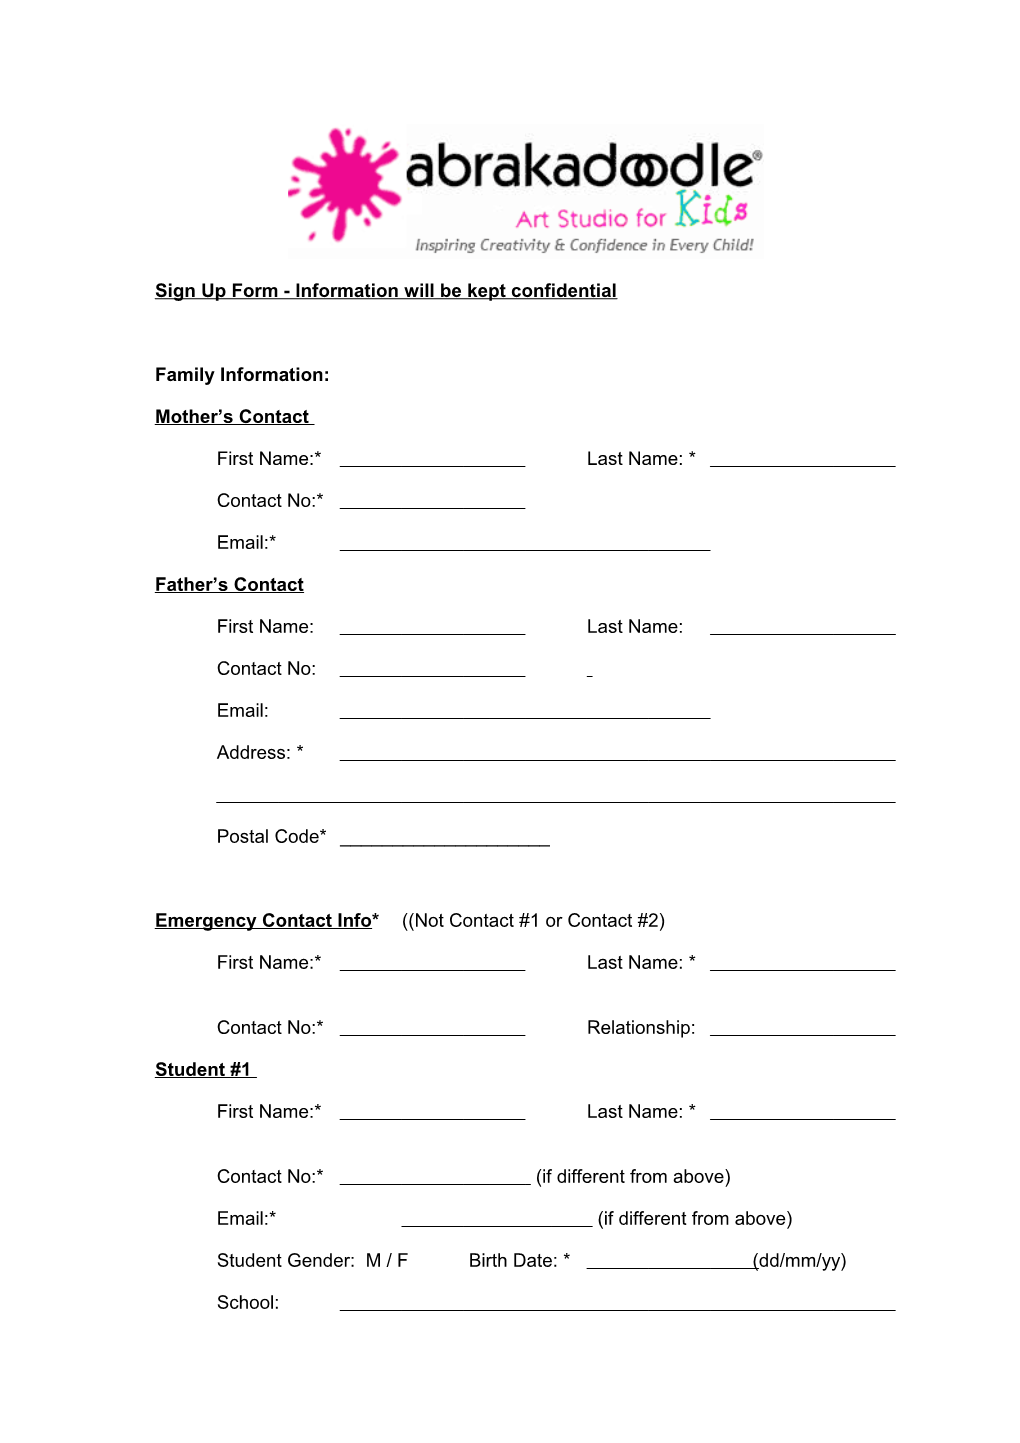 Sign up Form - Information Will Be Kept Confidential